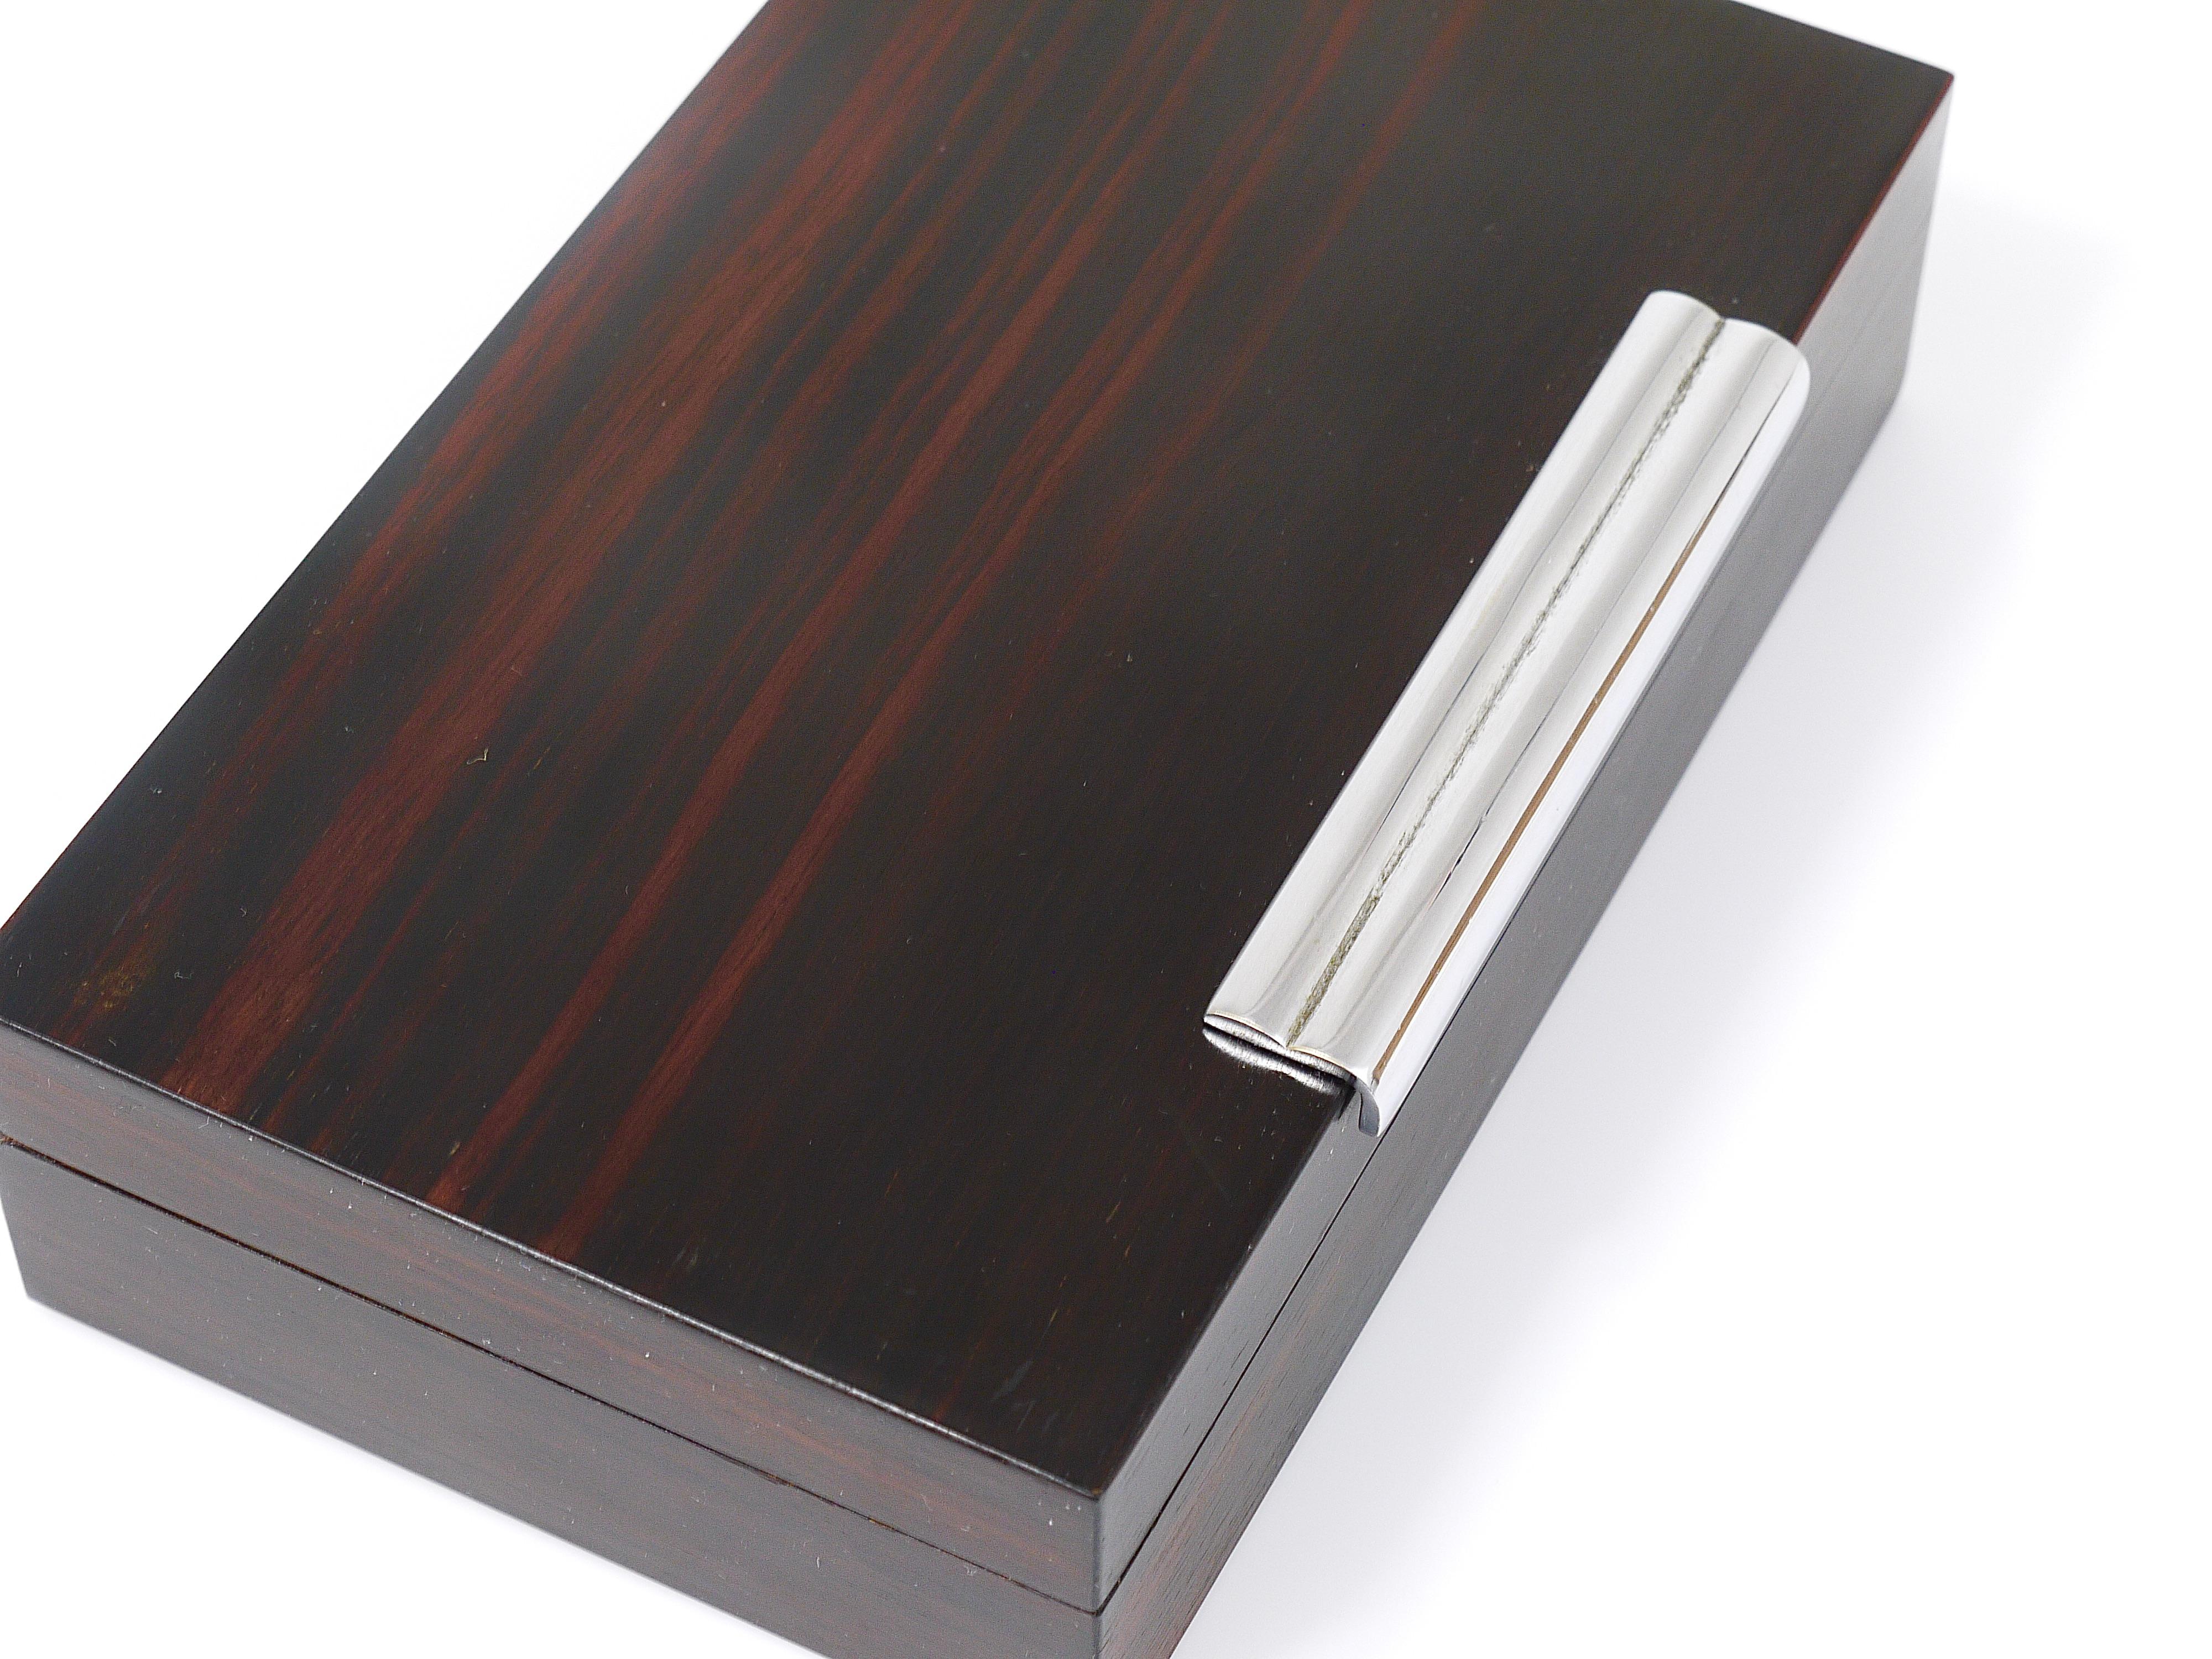 French Art Deco Rosewood & Nickel Storage Box, Maison Desny Style, France, 1930s For Sale 12